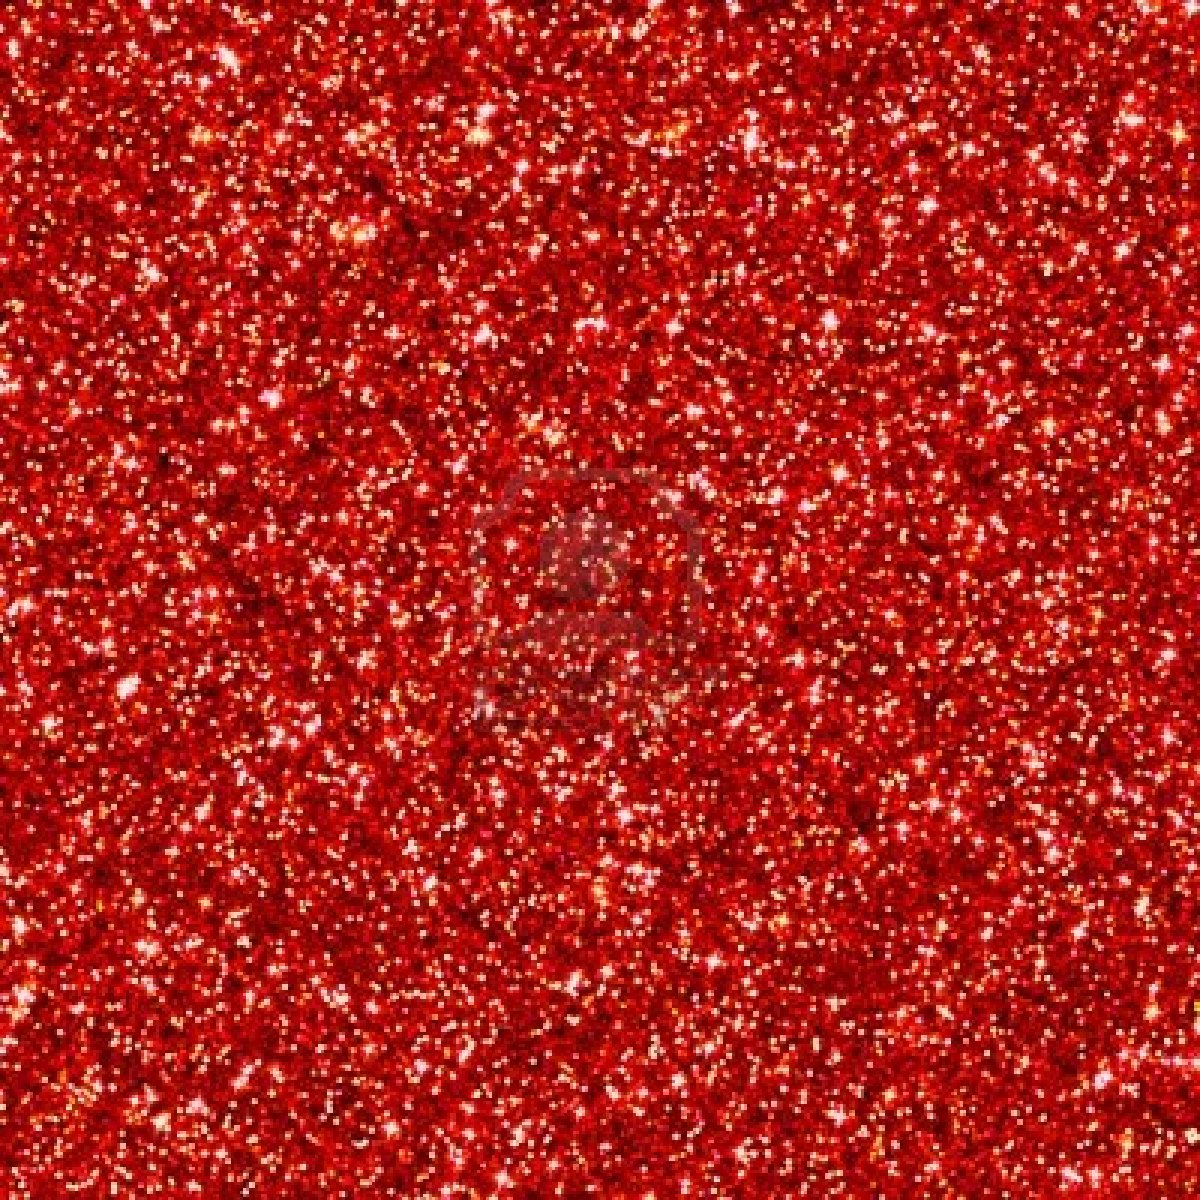  Related Red And Gold Background Dark Red Glitter Background